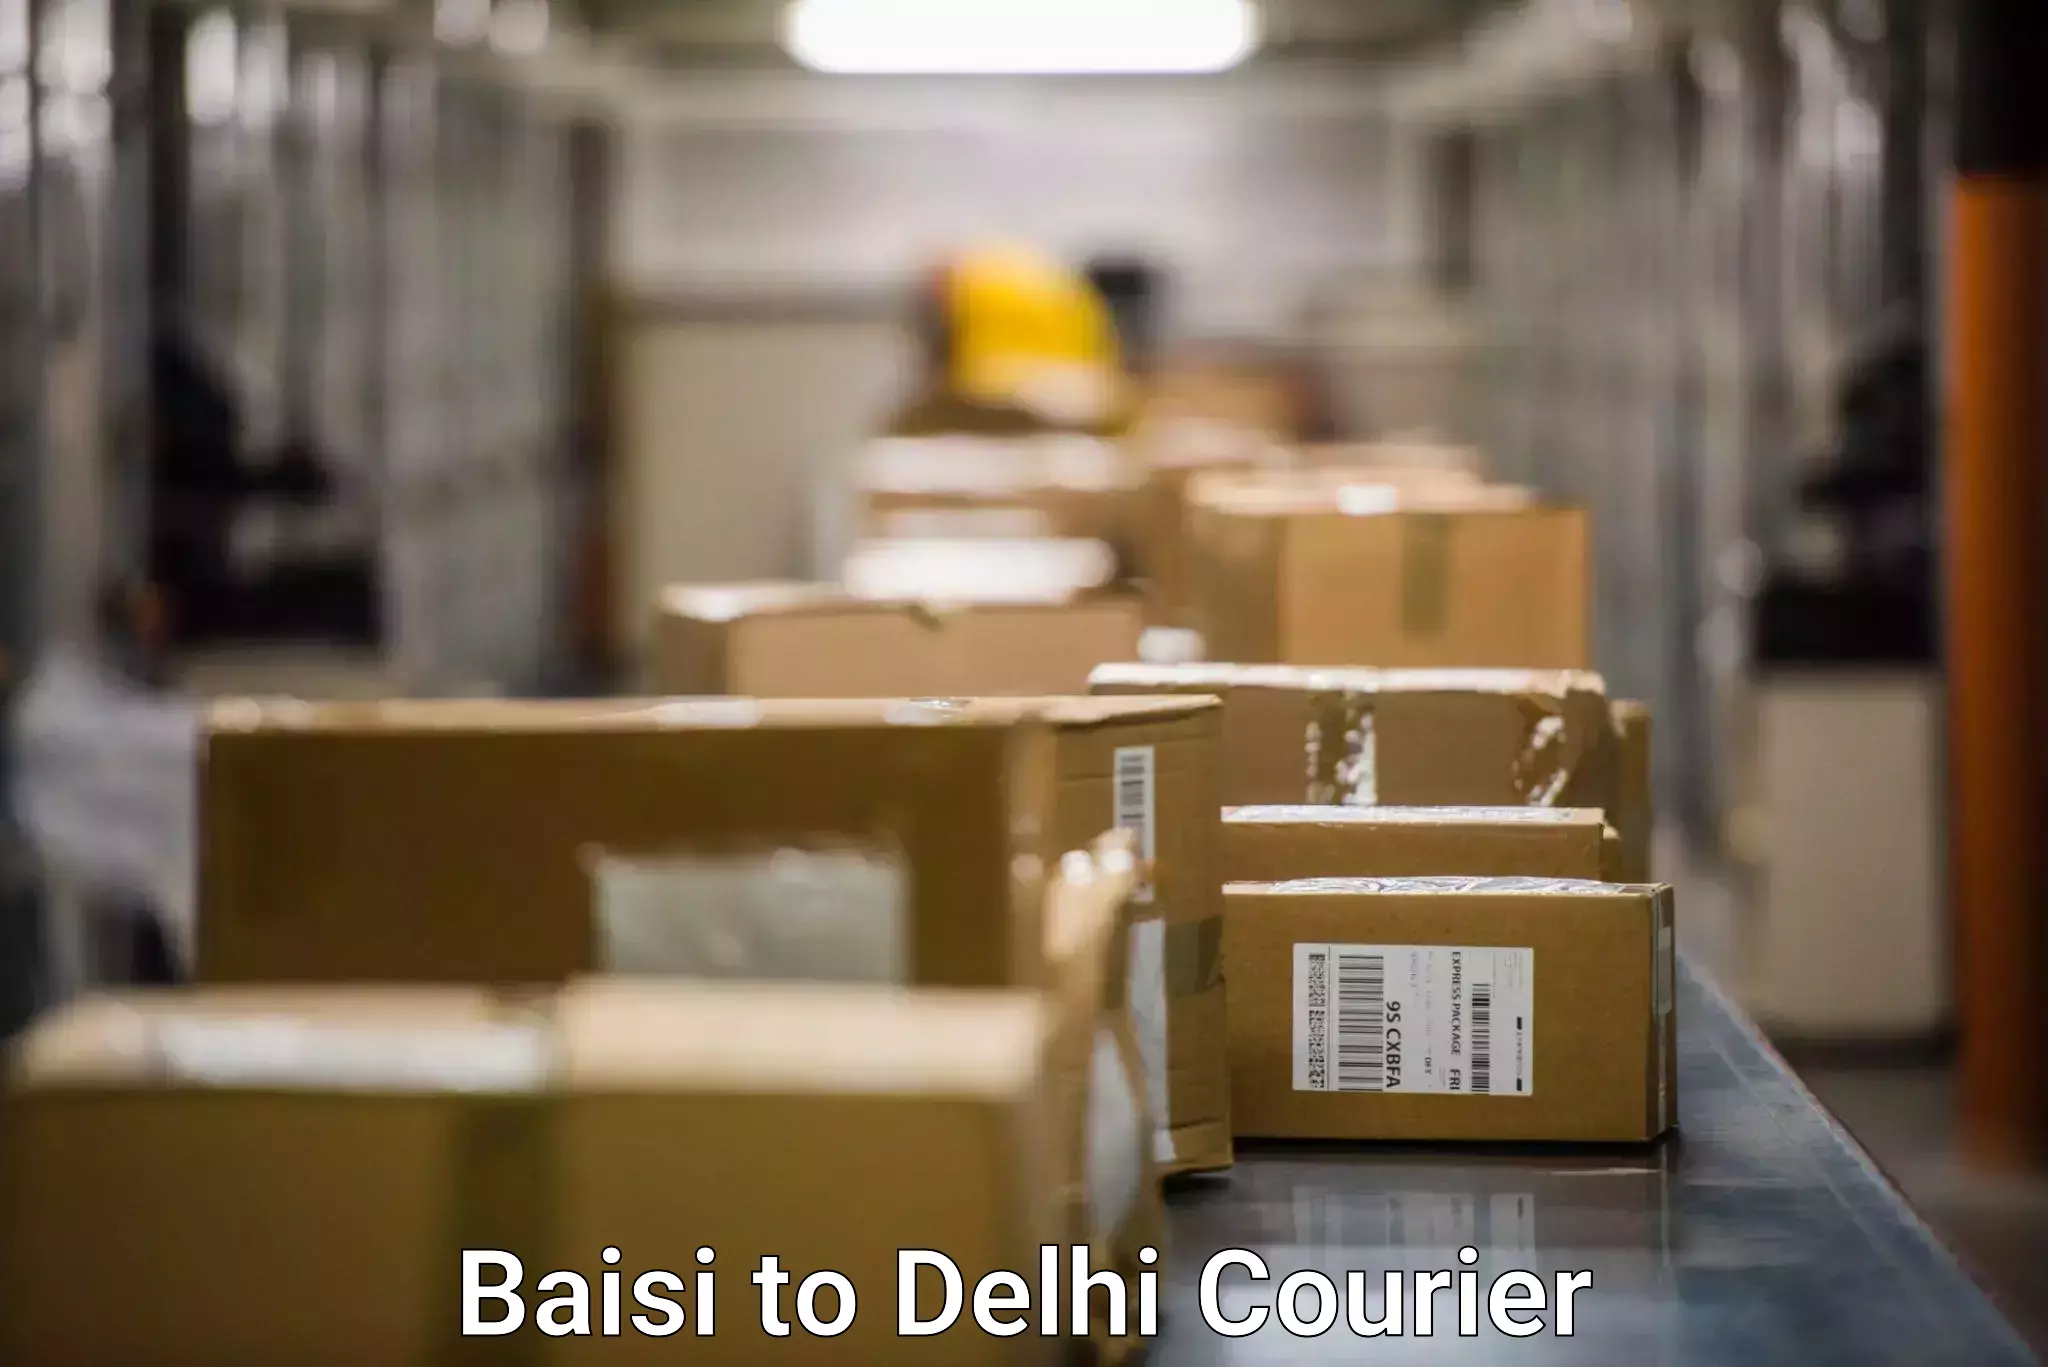 On-demand delivery in Baisi to Lodhi Road